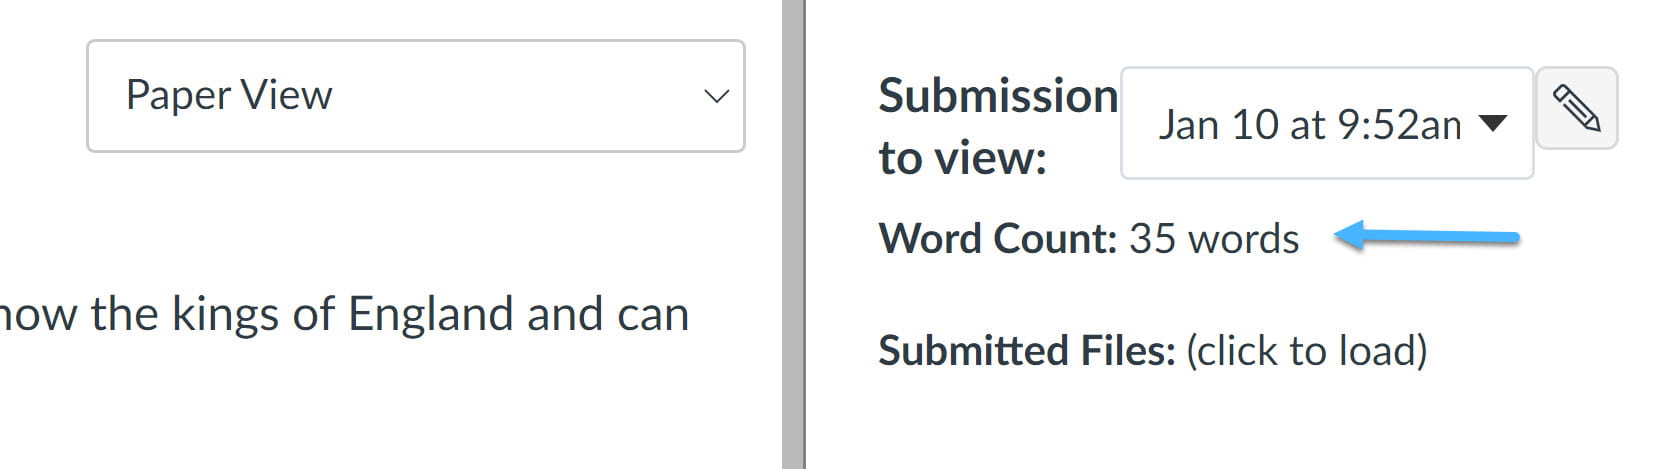 Student submission with word count indicated